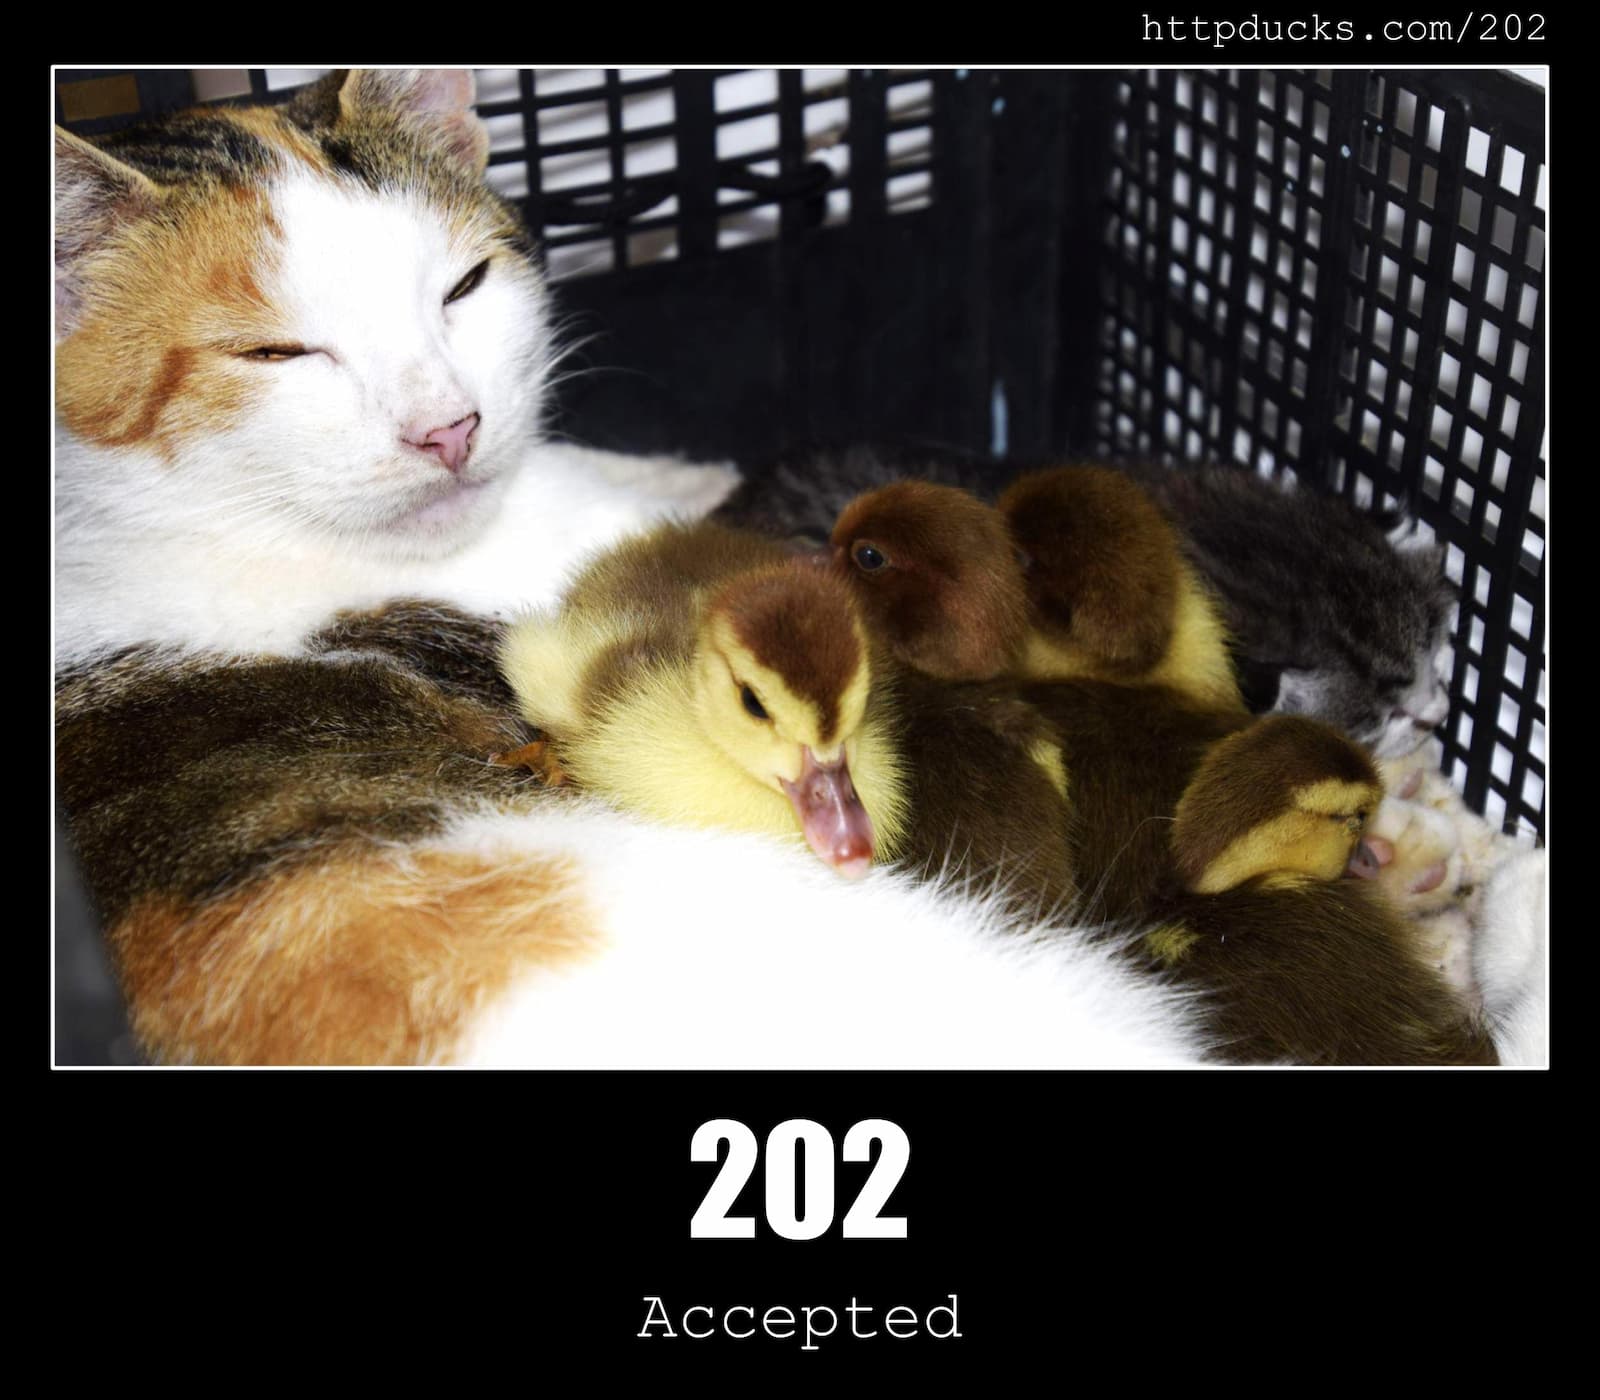 HTTP Status Code 202 Accepted & Ducks